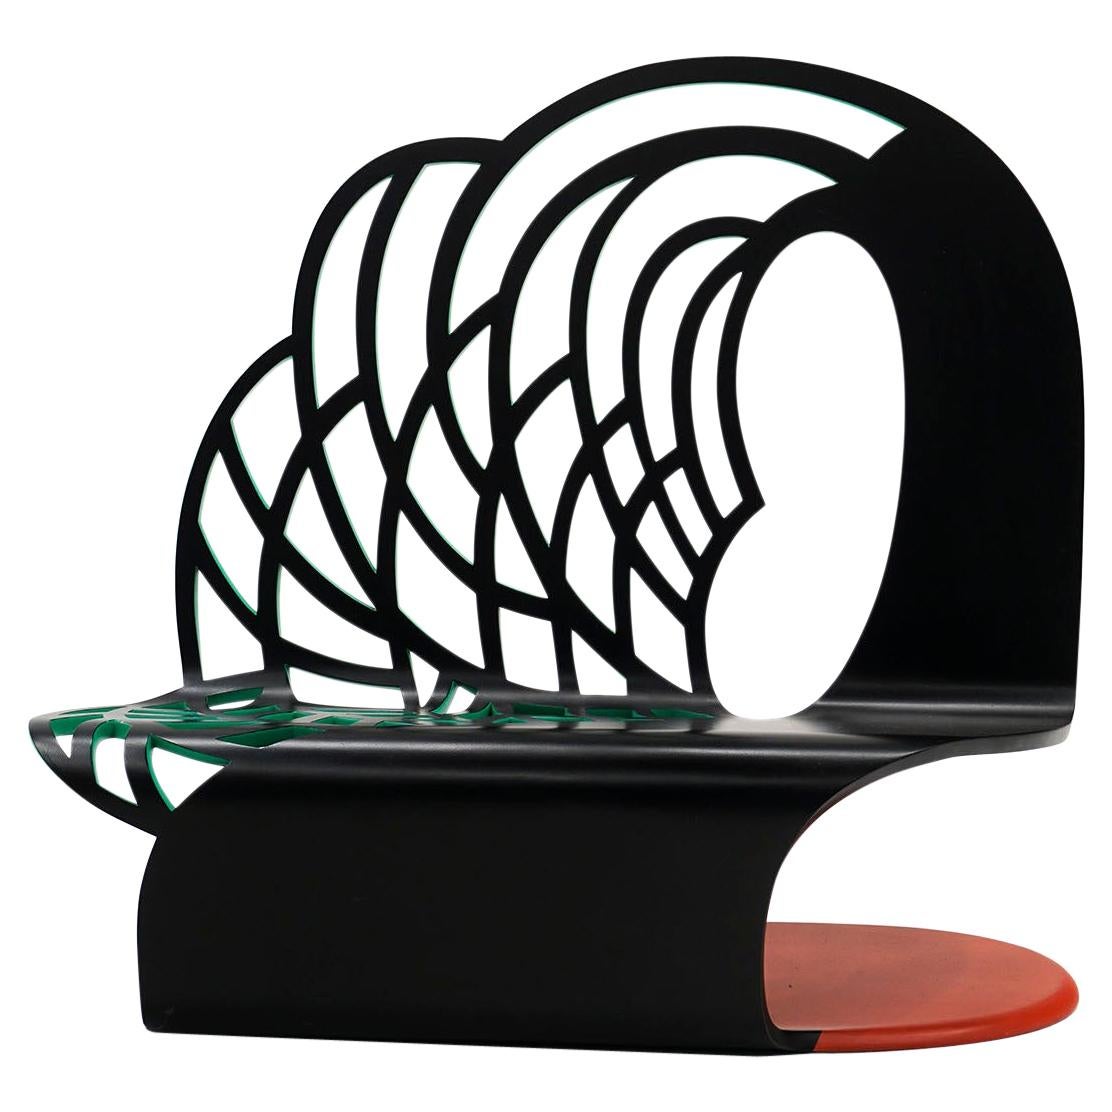 Postmodern Bench with High Back by Alan Siegel, 1986. Signed. #2 in the Edition